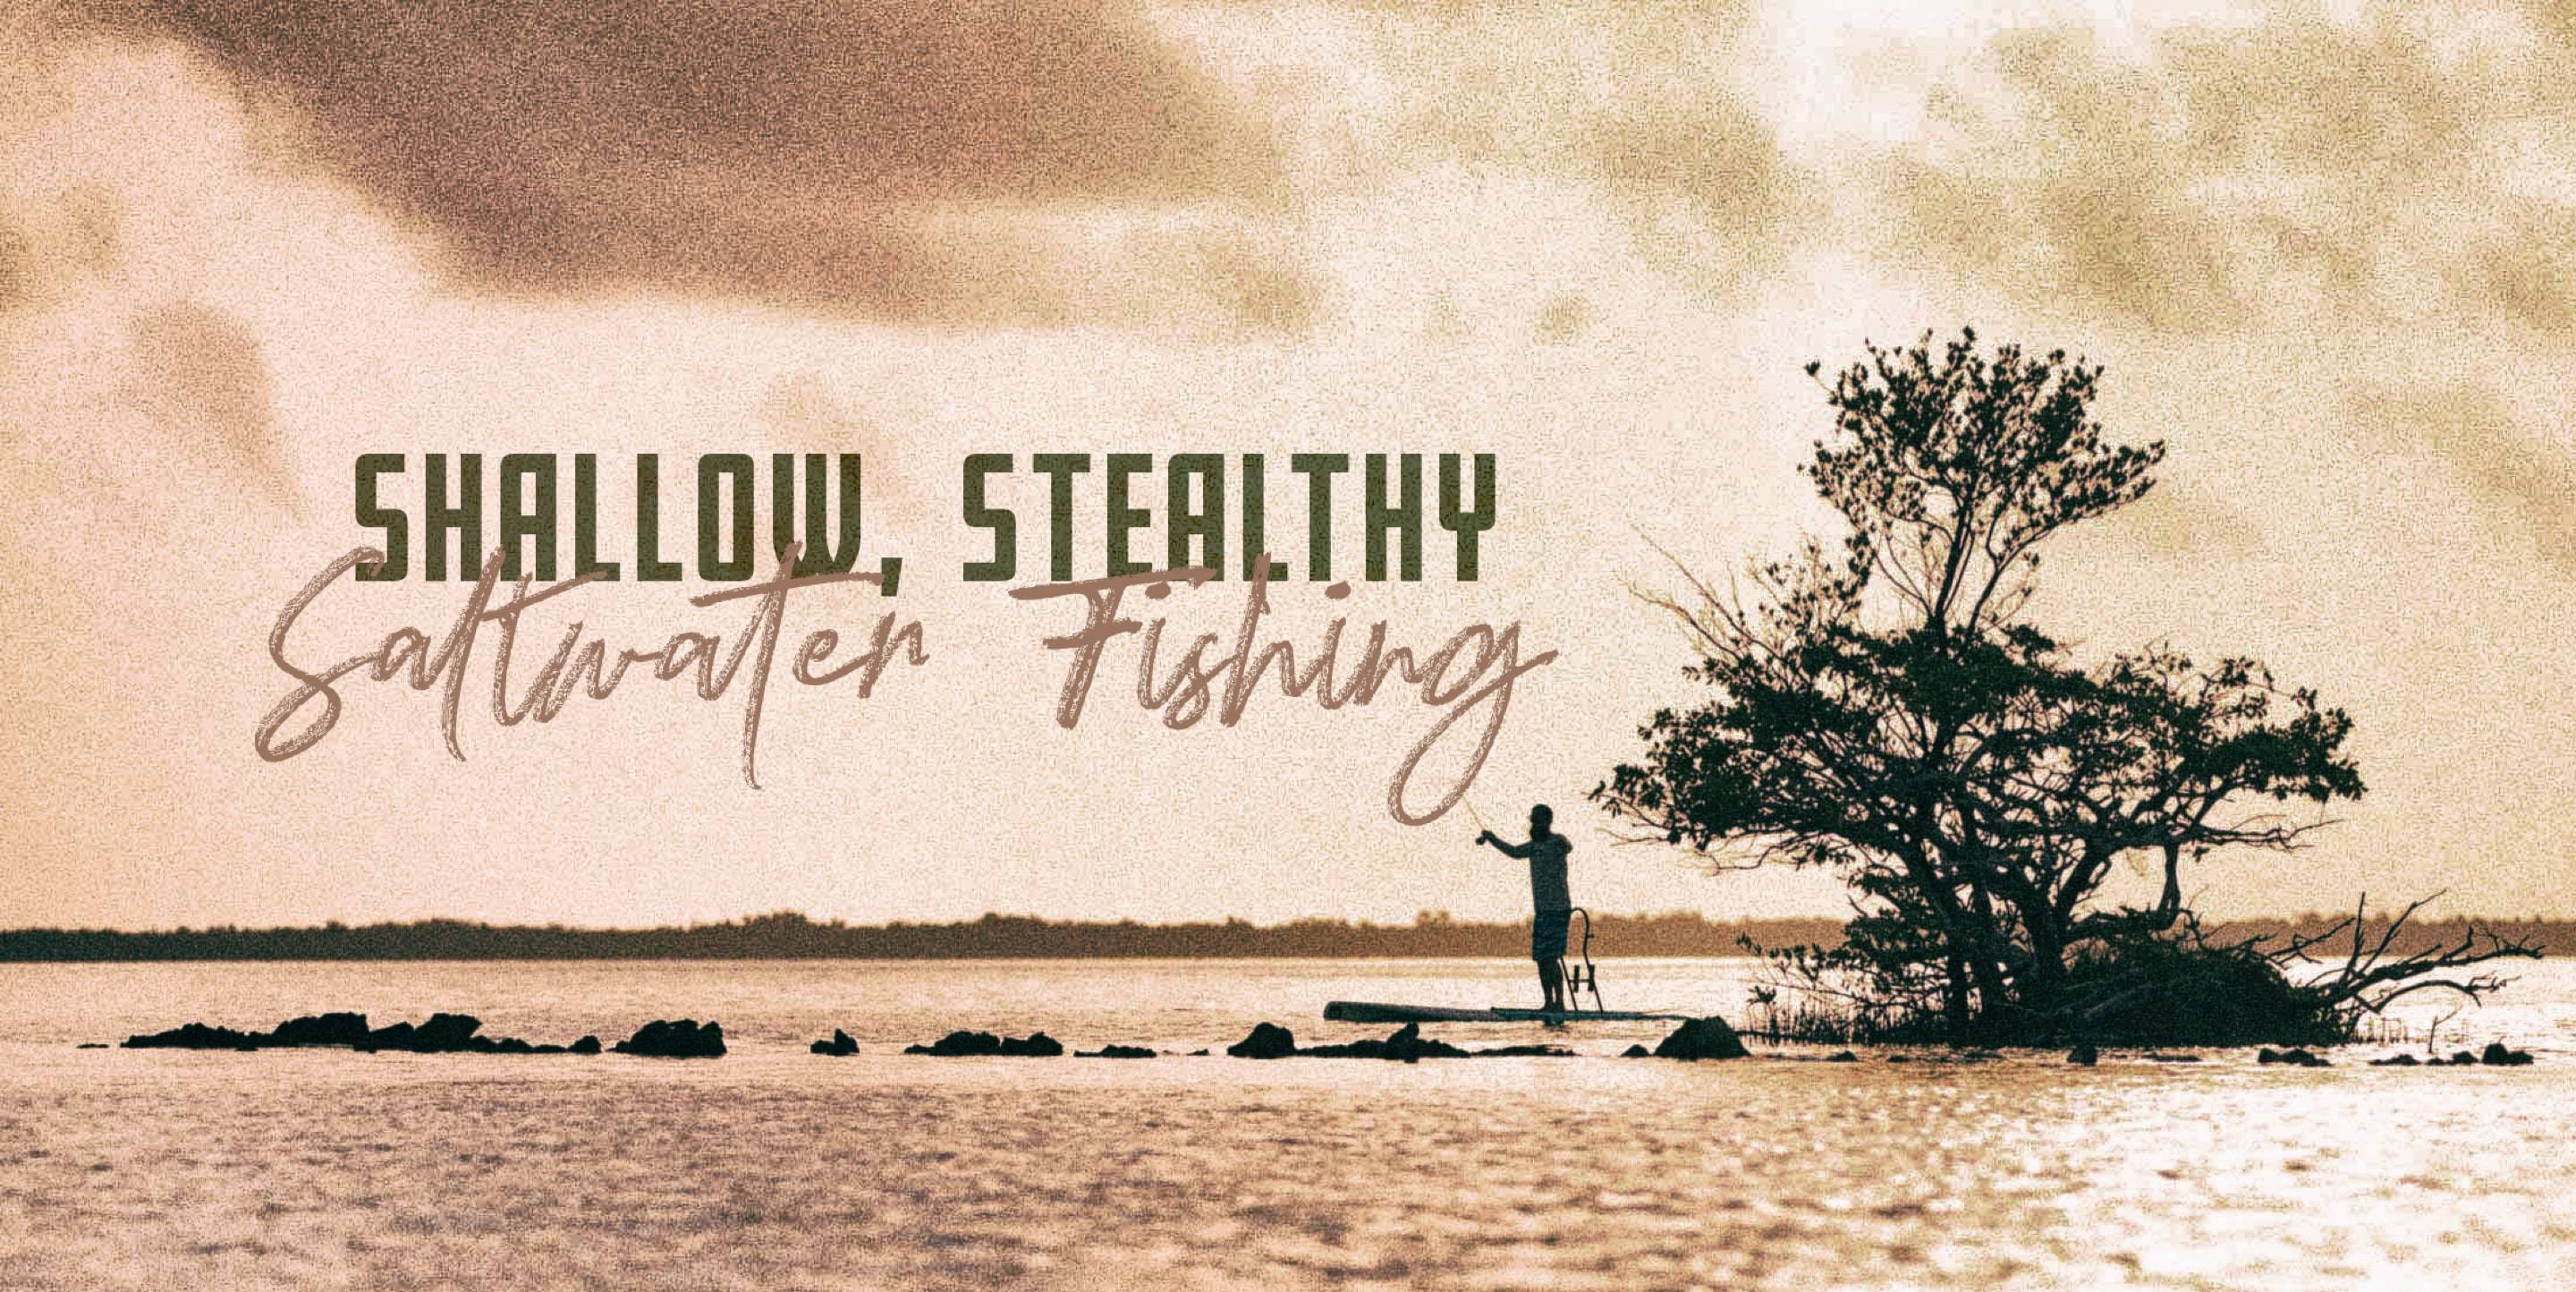 Shallow, Stealthy, Saltwater Fishing